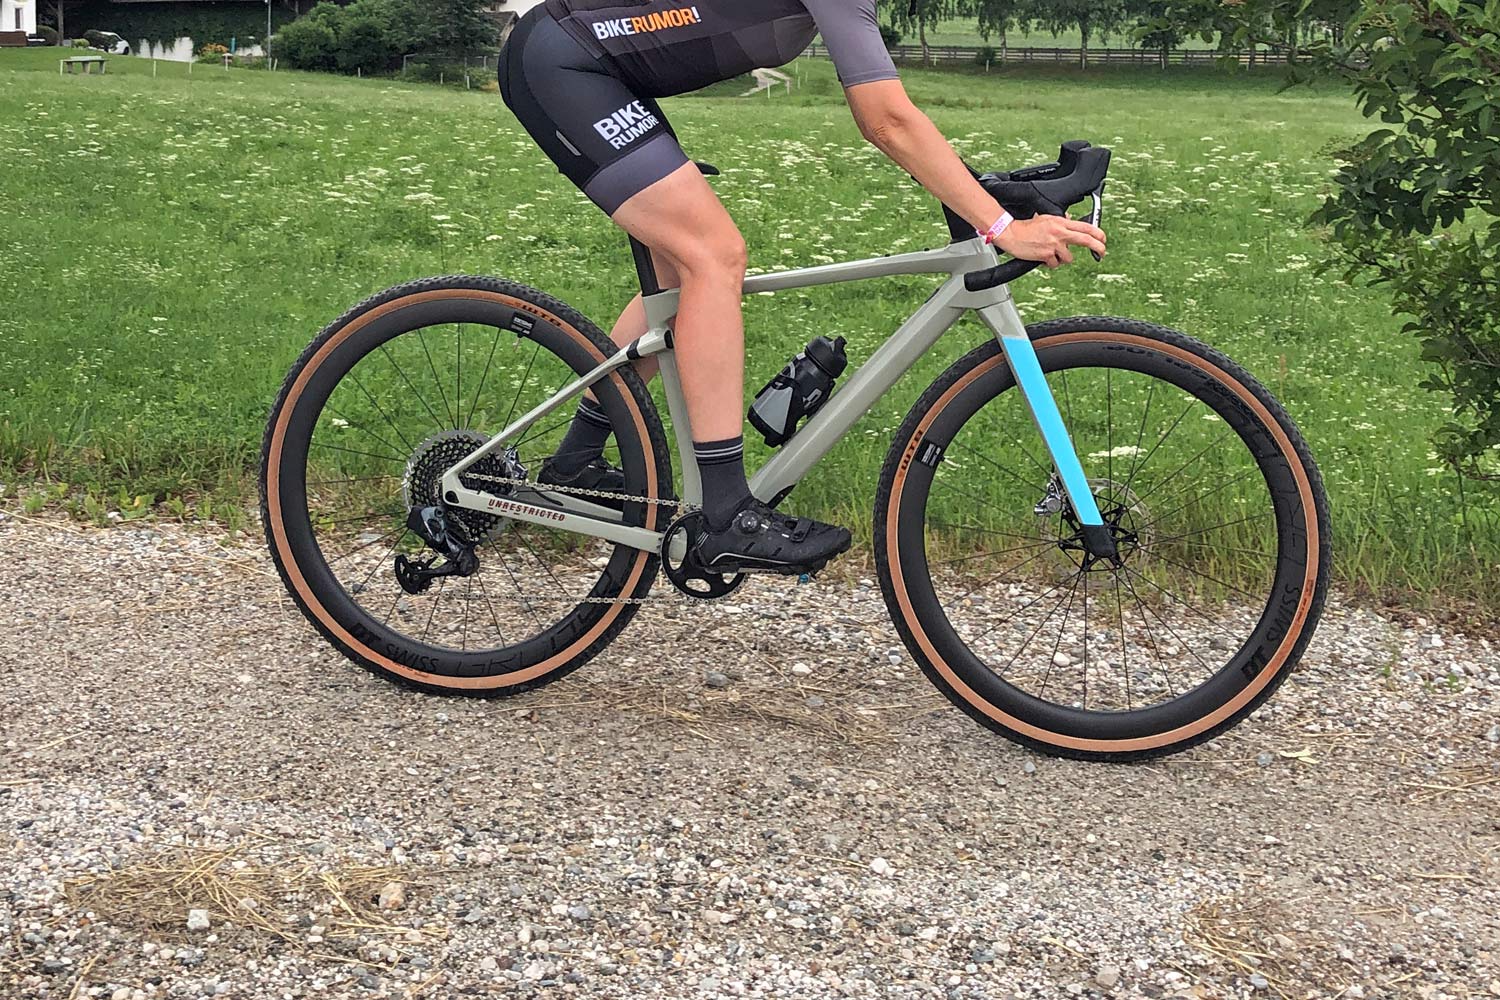 Bear down on big rides with the new BMC URS “Gravel Plus” bike